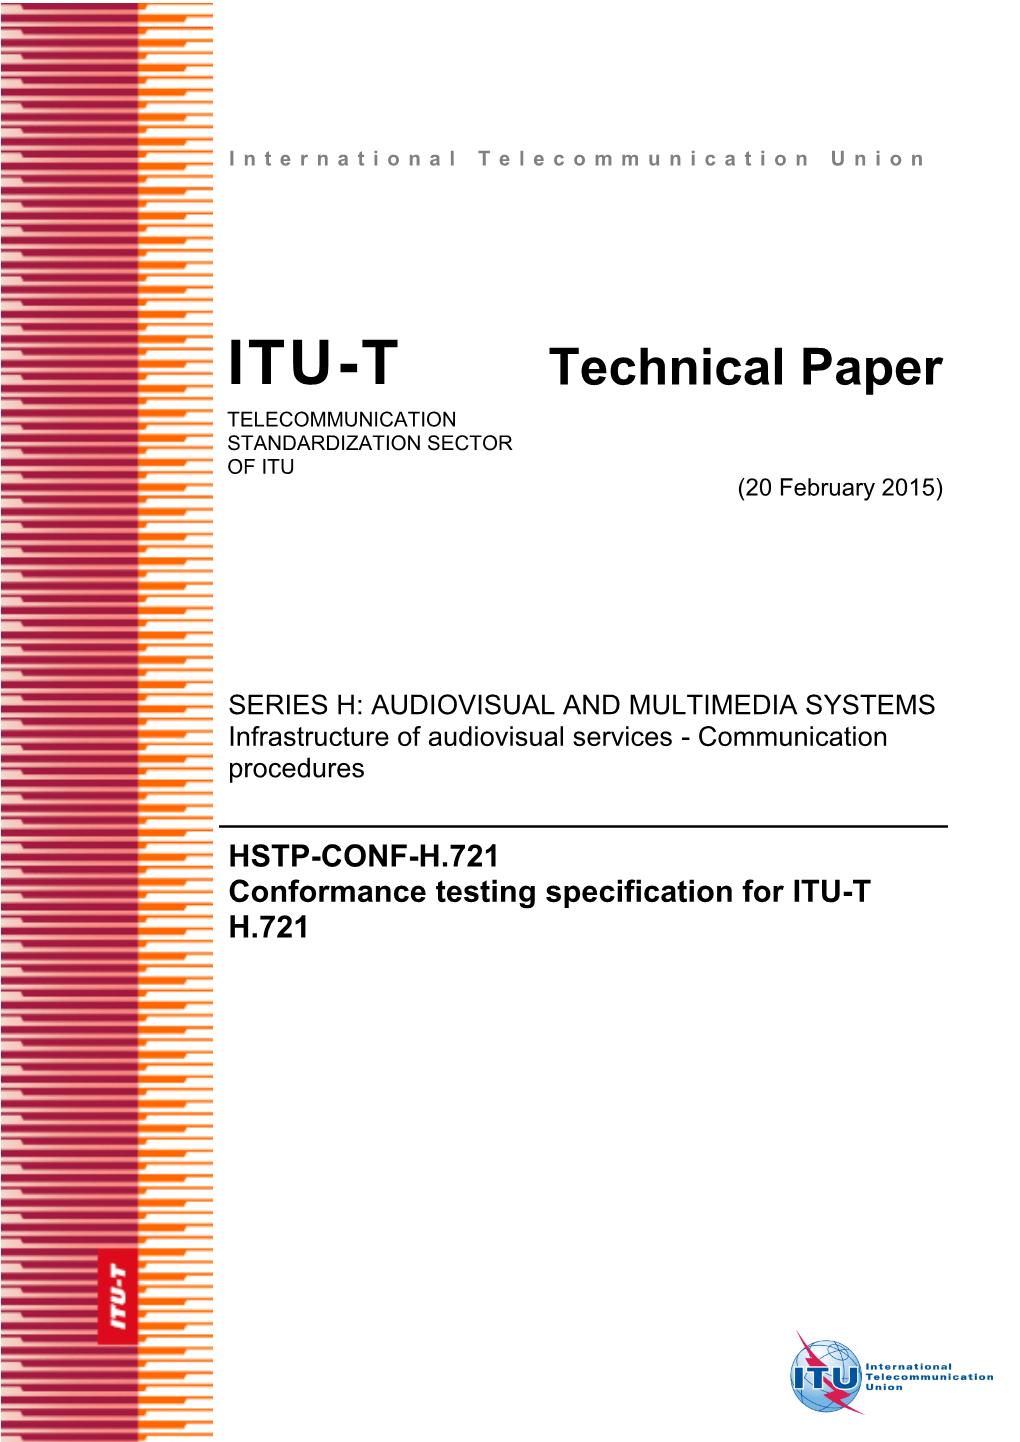 HSTP.CONF-H721 “Conformance Testing Specification for H.721”